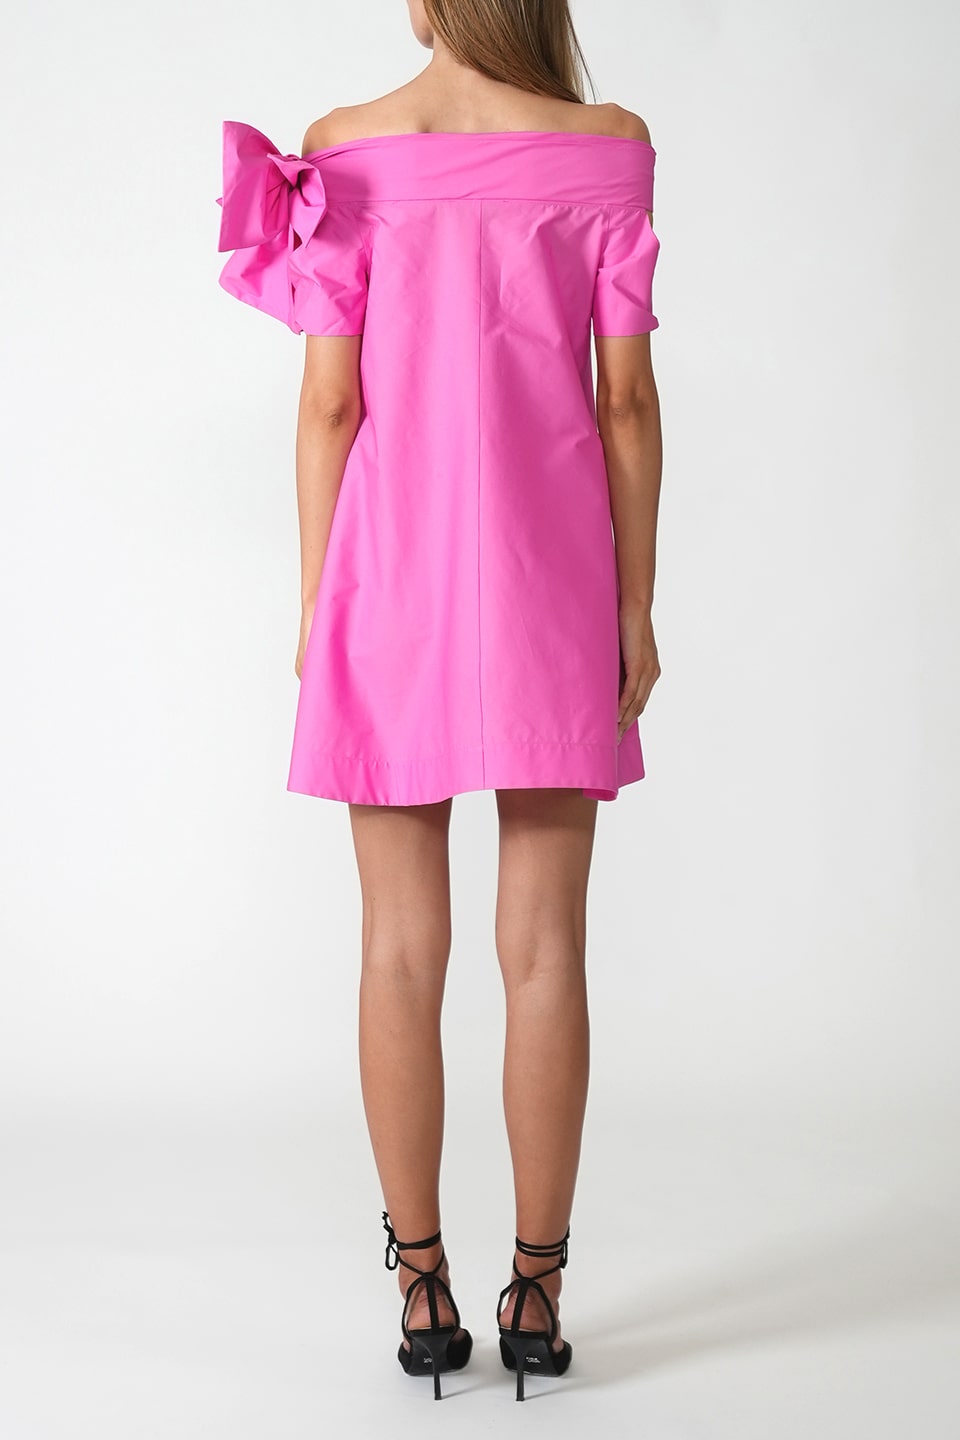 Designer Pink Mini dresses, shop online with free delivery in UAE. Product gallery 5